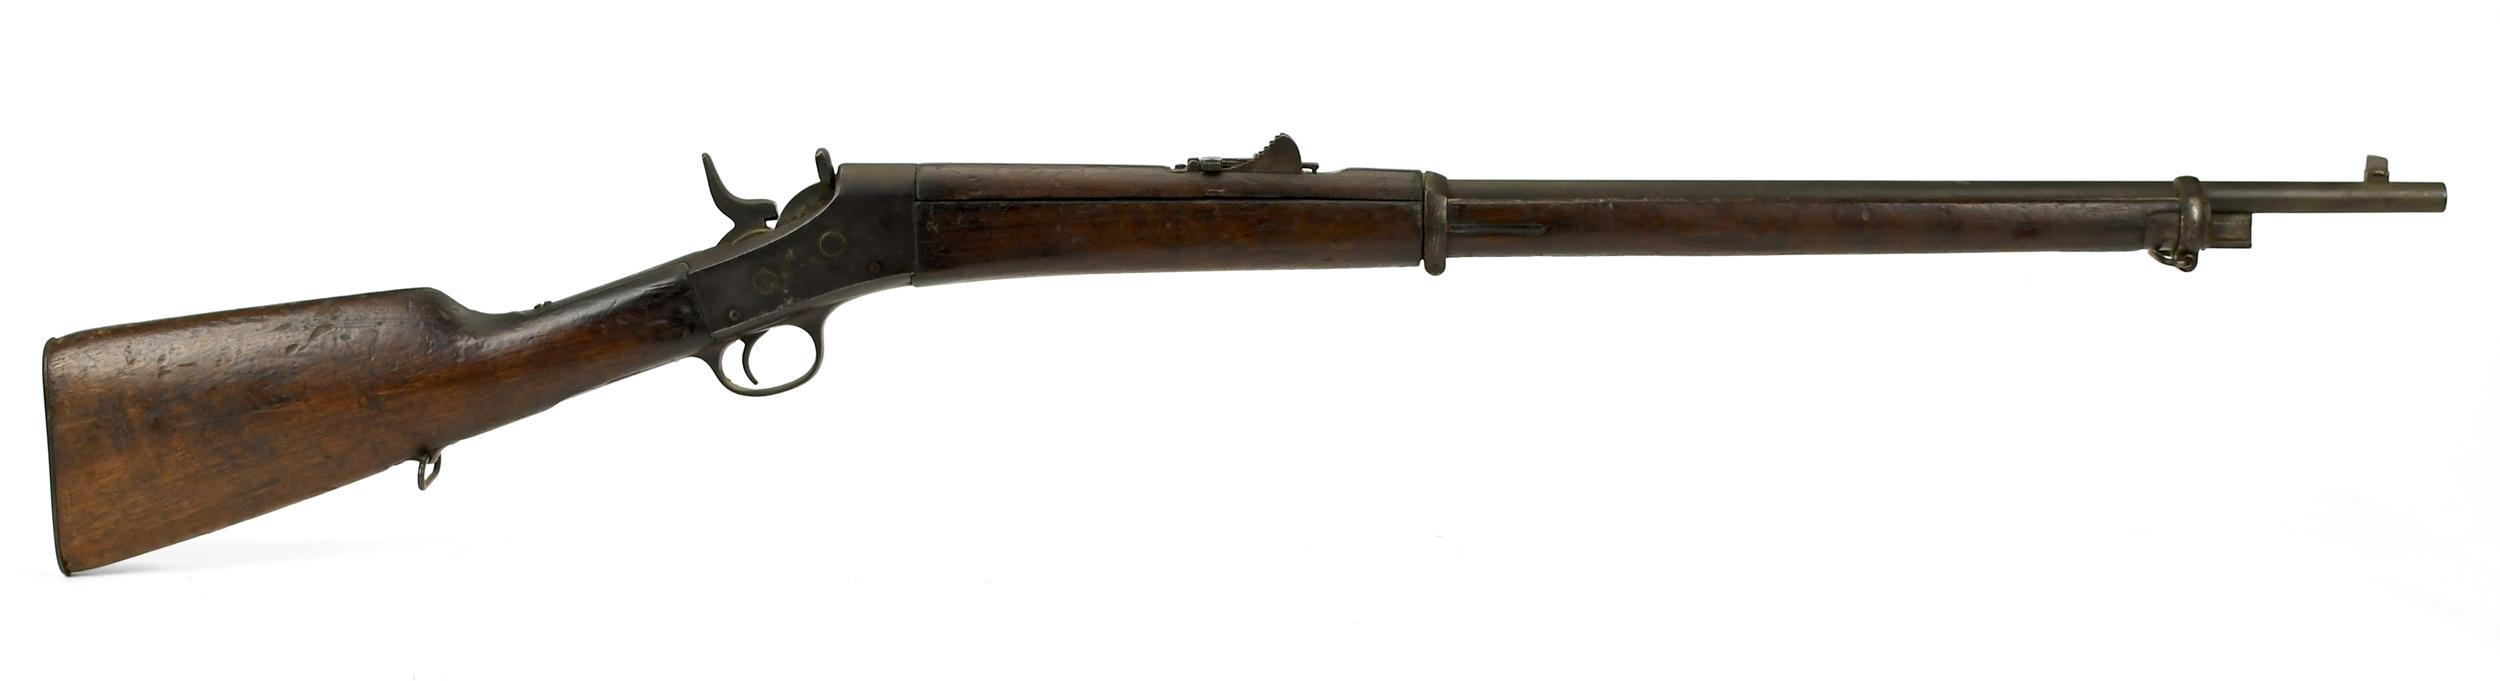 19TH C. ROLLING BLOCK RIFLE. A